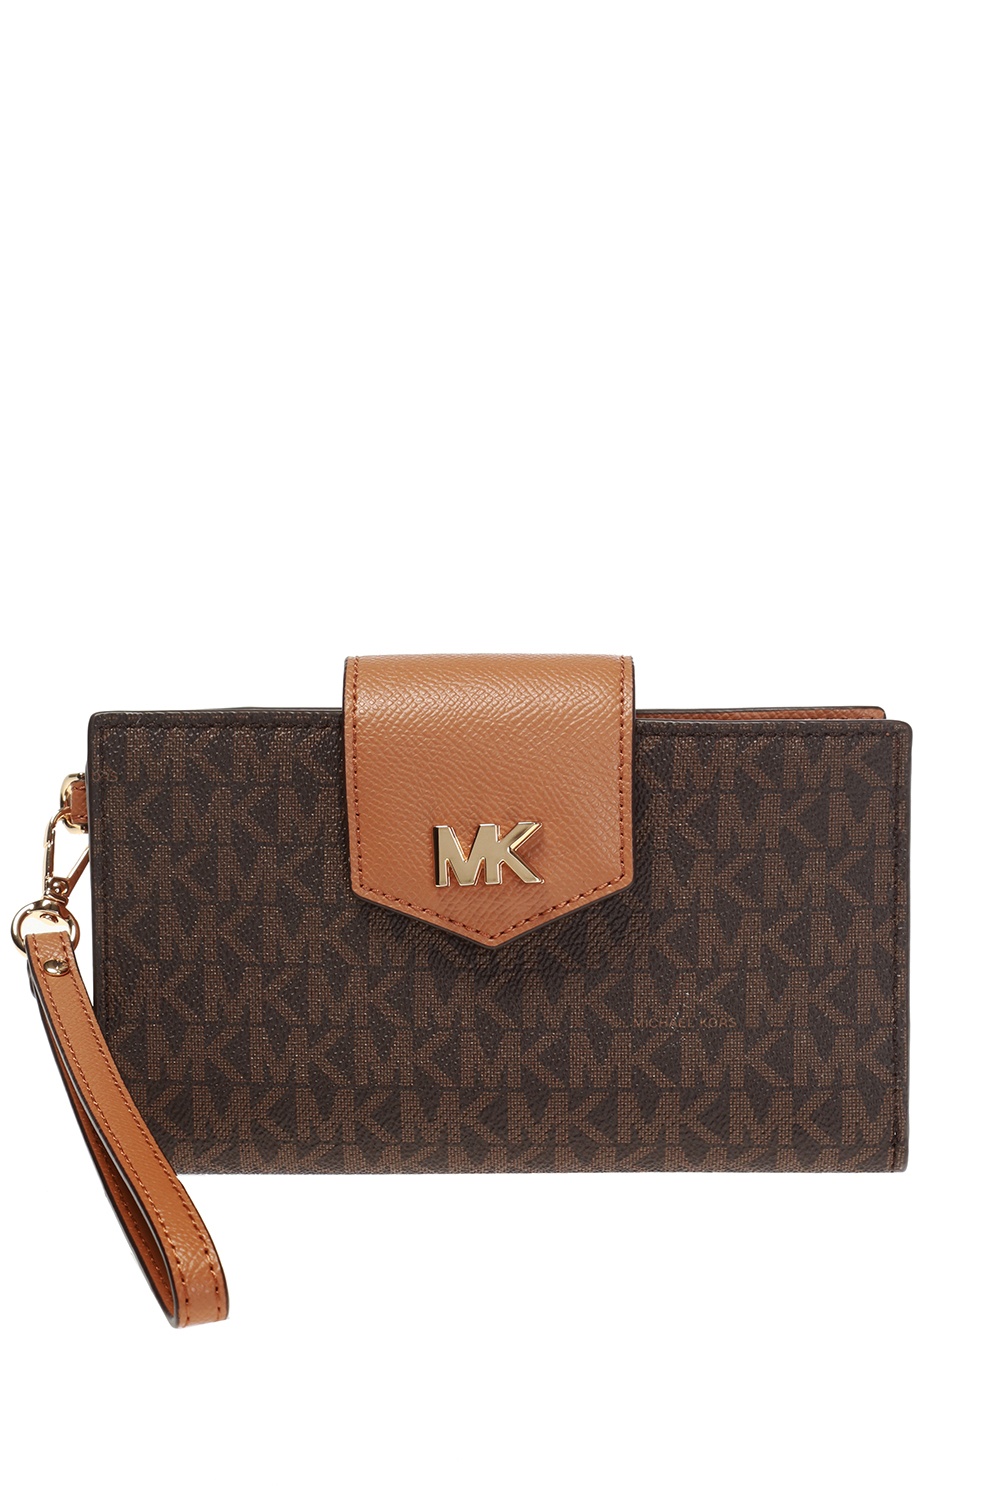 michael kors wallet with wrist strap